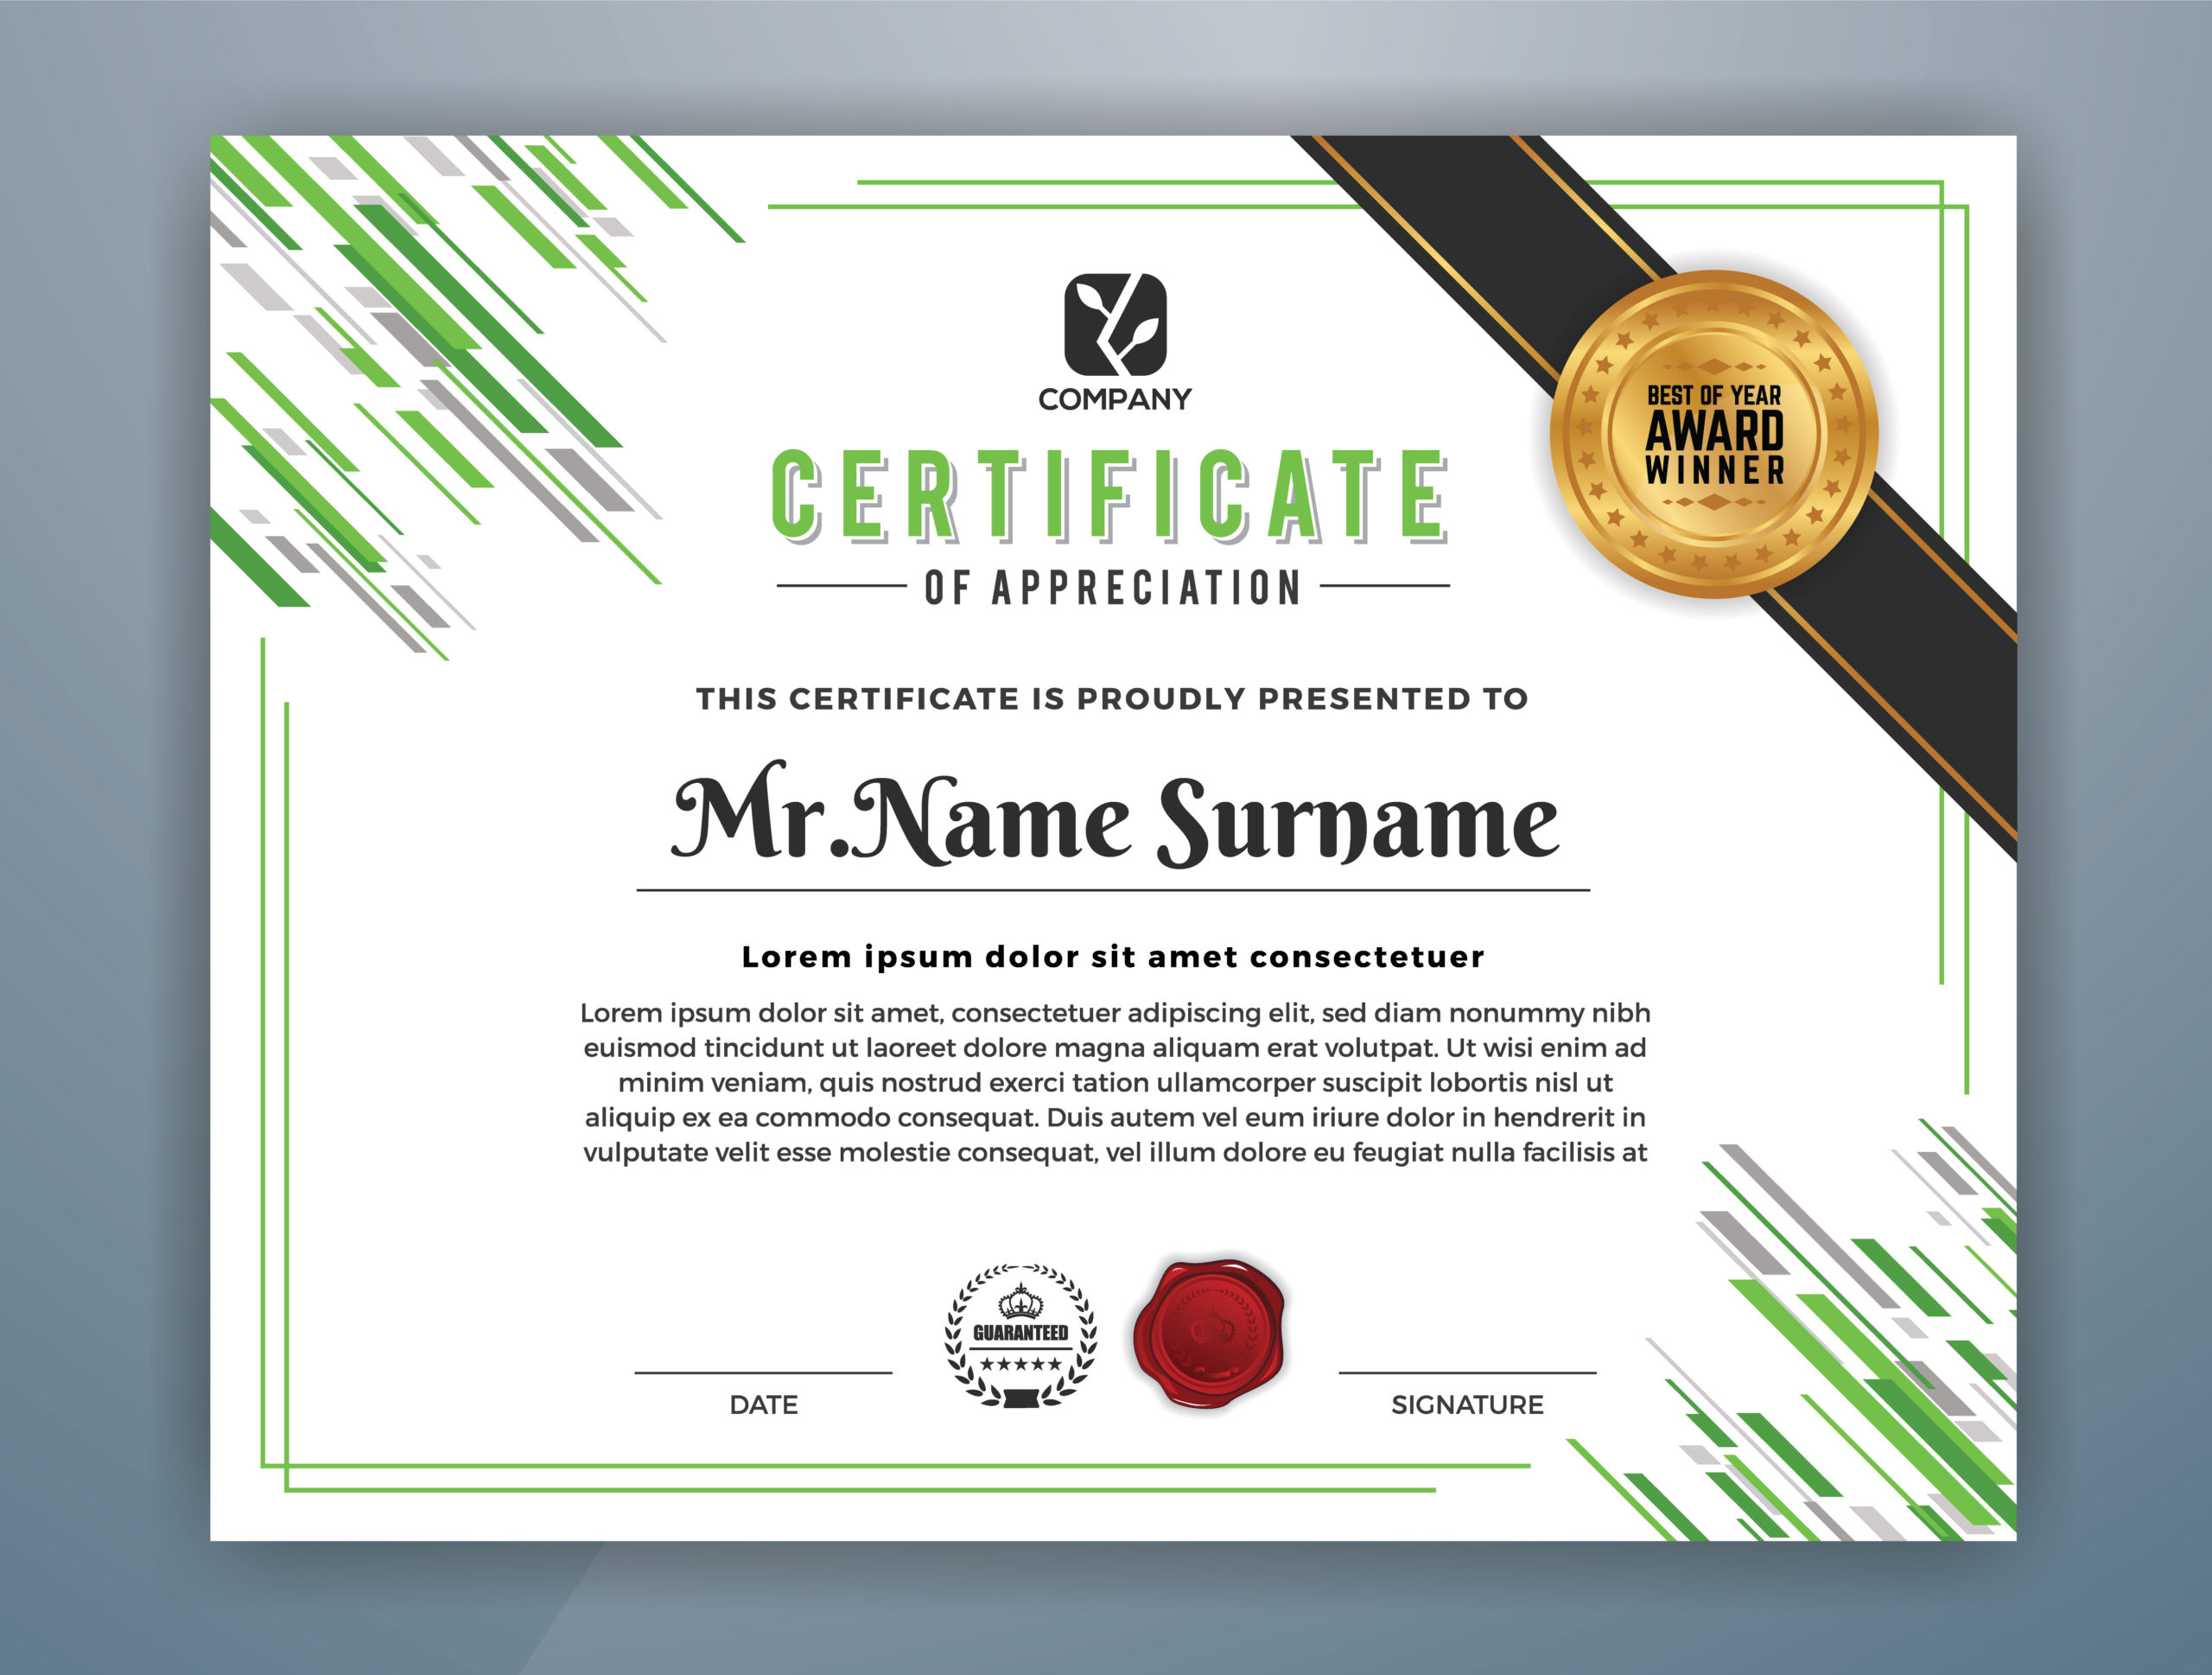 Stunning Professional Certificate Templates For Word